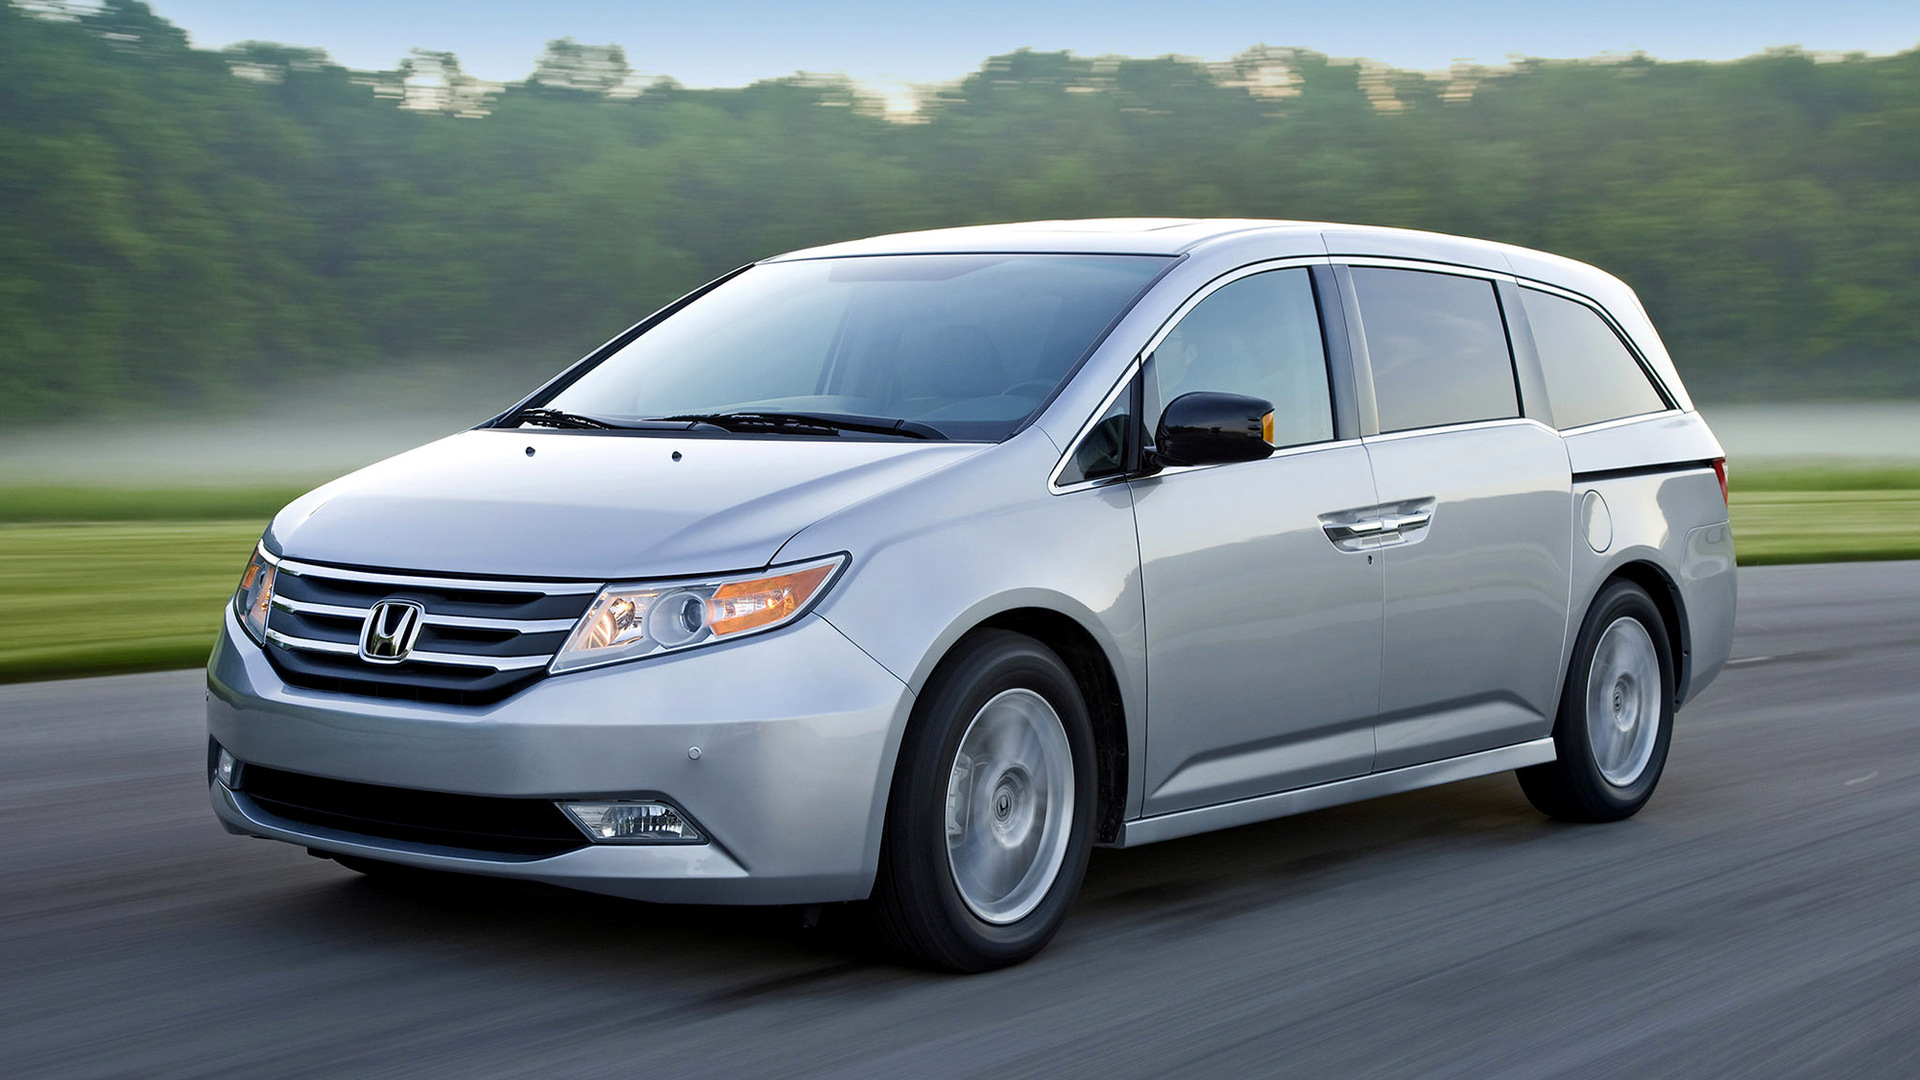 Honda Odyssey (2010) US Wallpapers and HD Images - Car Pixel